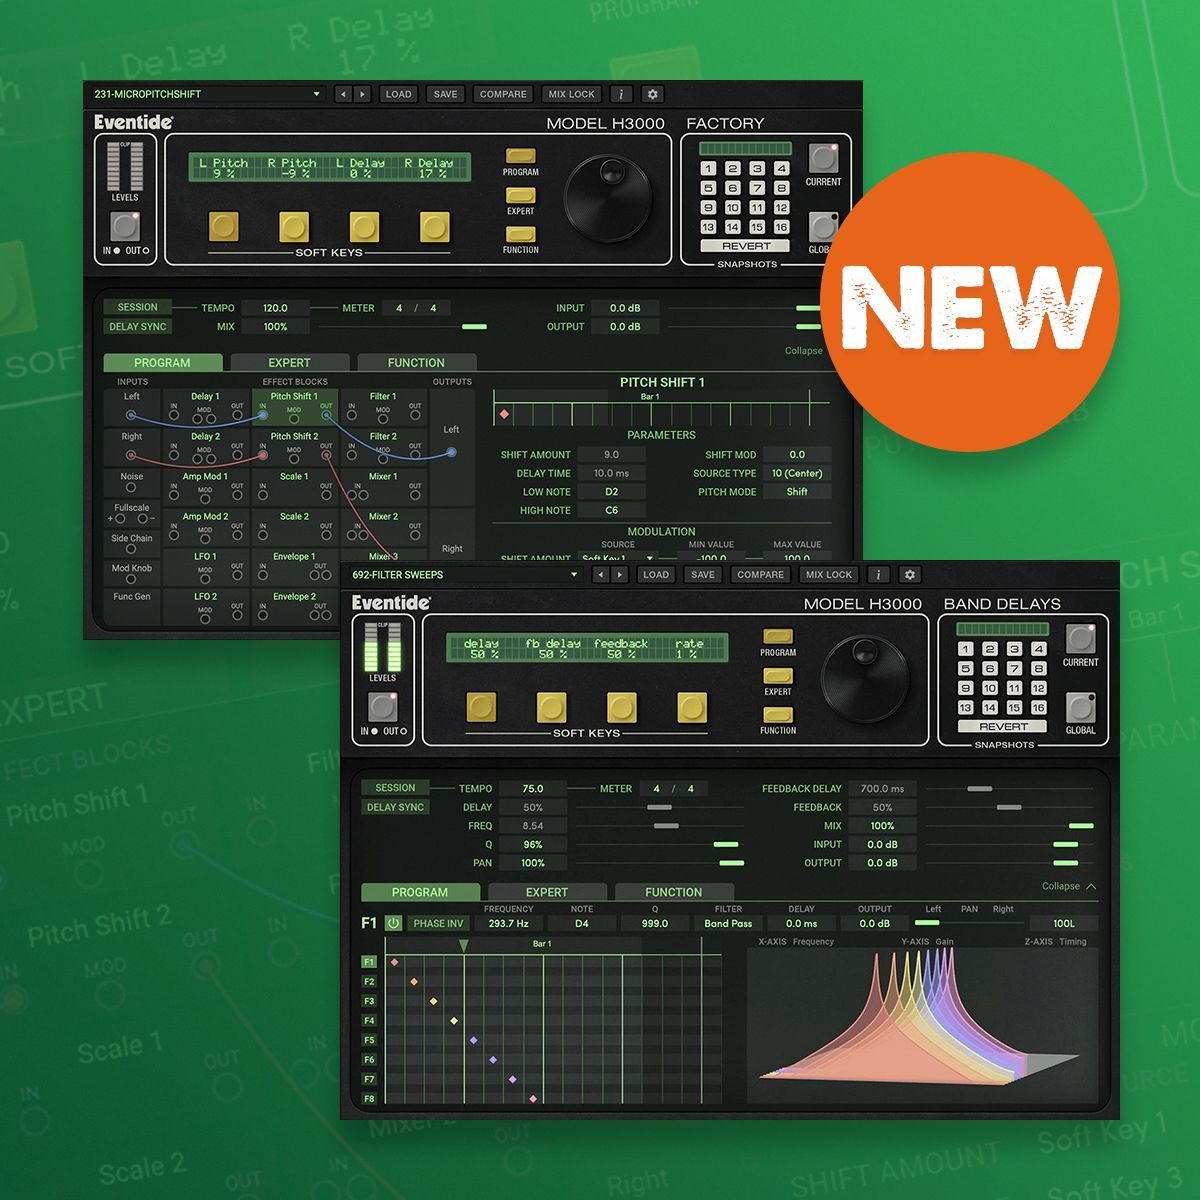 NEW from Eventide - H3000 MkII 🎛️

The Factory and Band Delays plugins are freshly updated with new AD/DA converter modeling, more presets, improved filters, and modernized resizable GUIs

Check them out here: pluginfox.com/h3000

@eventideaudio #eventide #h3000 #pluginfox